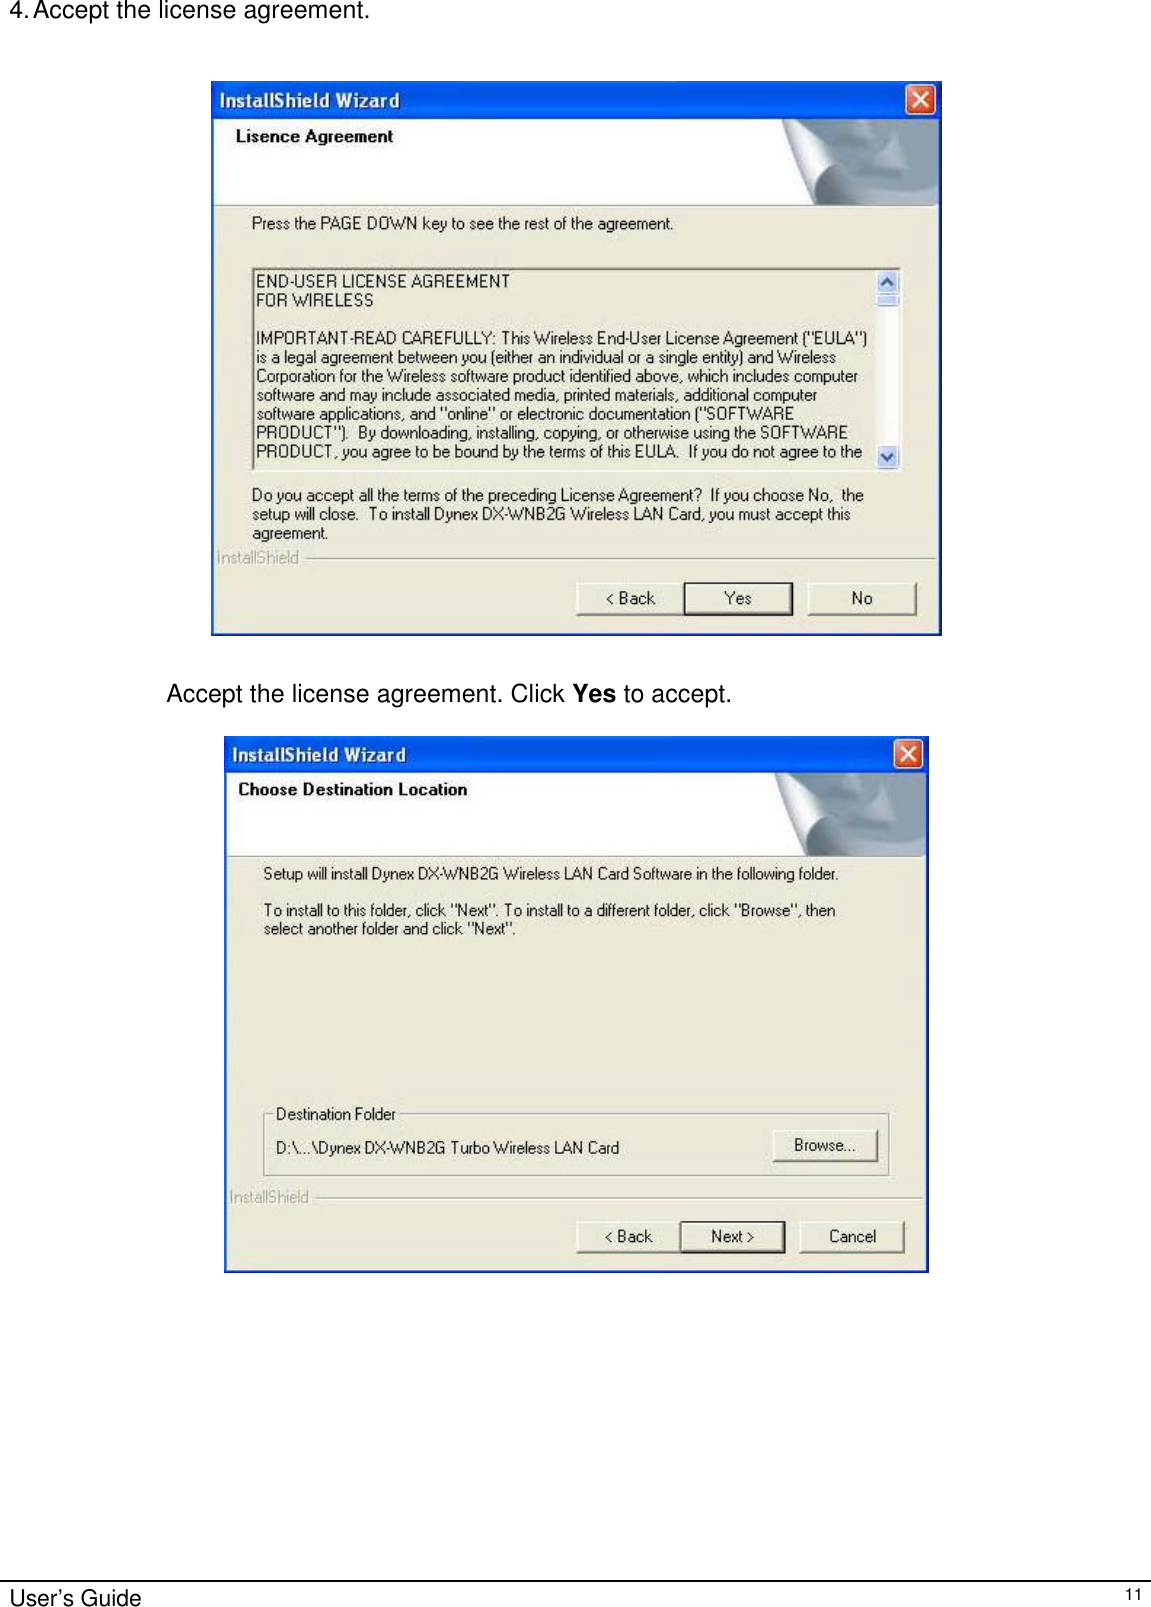                                                                                                                                                                                                                                                                                                                                        User’s Guide   11 4. Accept the license agreement.     Accept the license agreement. Click Yes to accept.                        